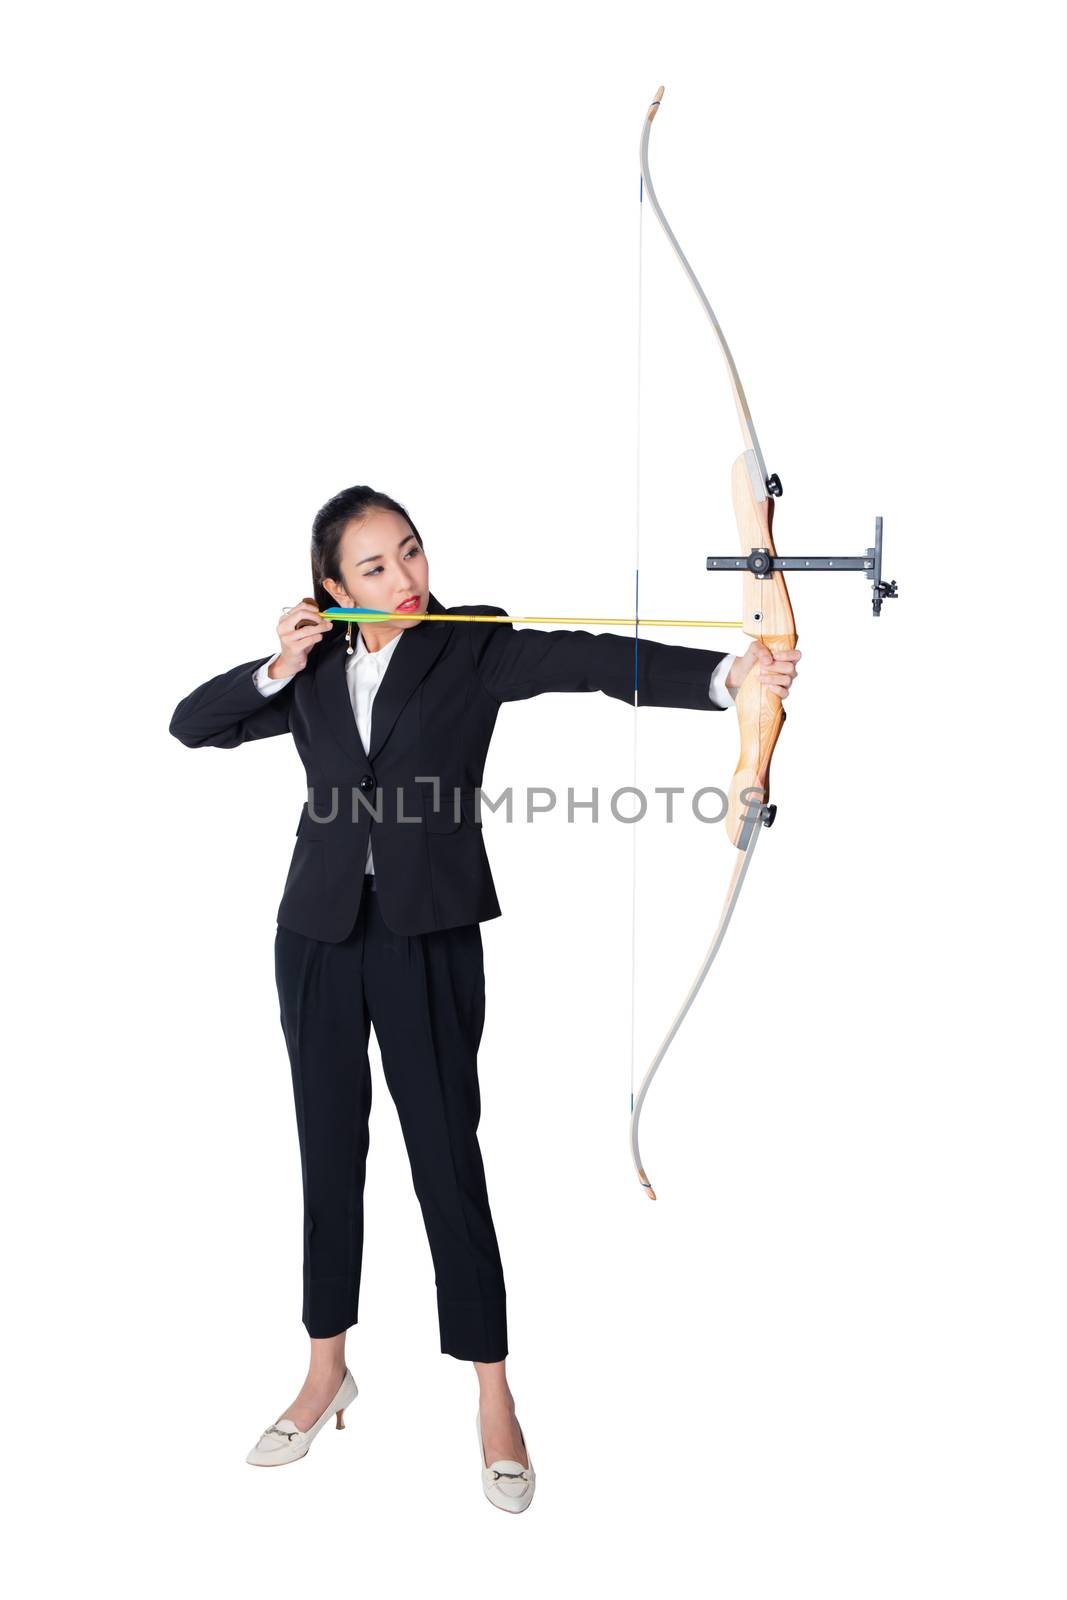 Portrait of concentrated female with crossbow in hands over white background